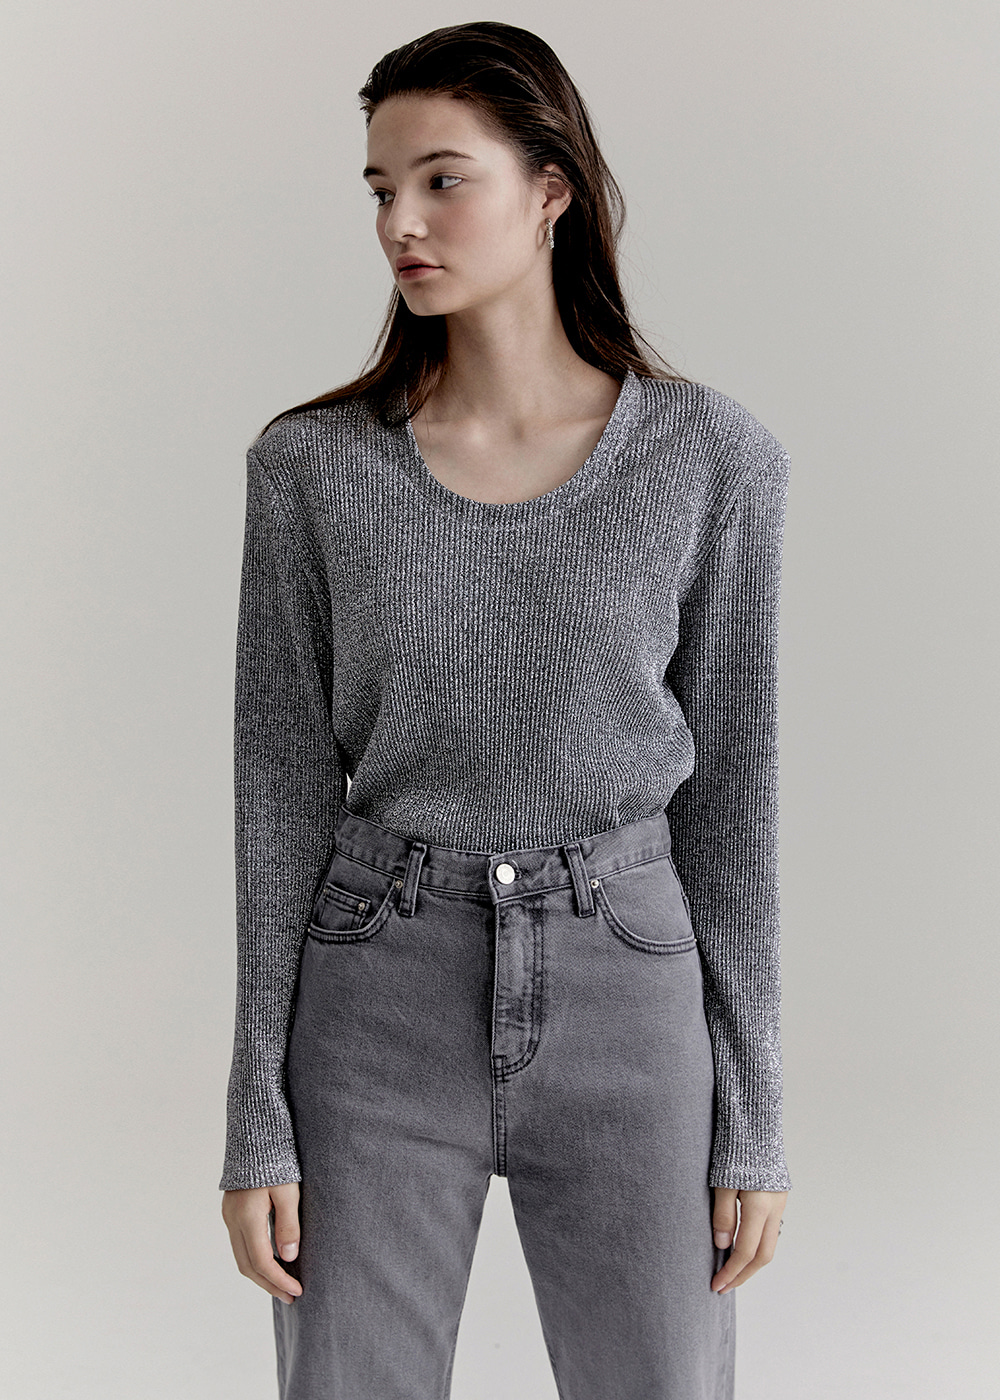 Padded Metalic Knit Top - Silver